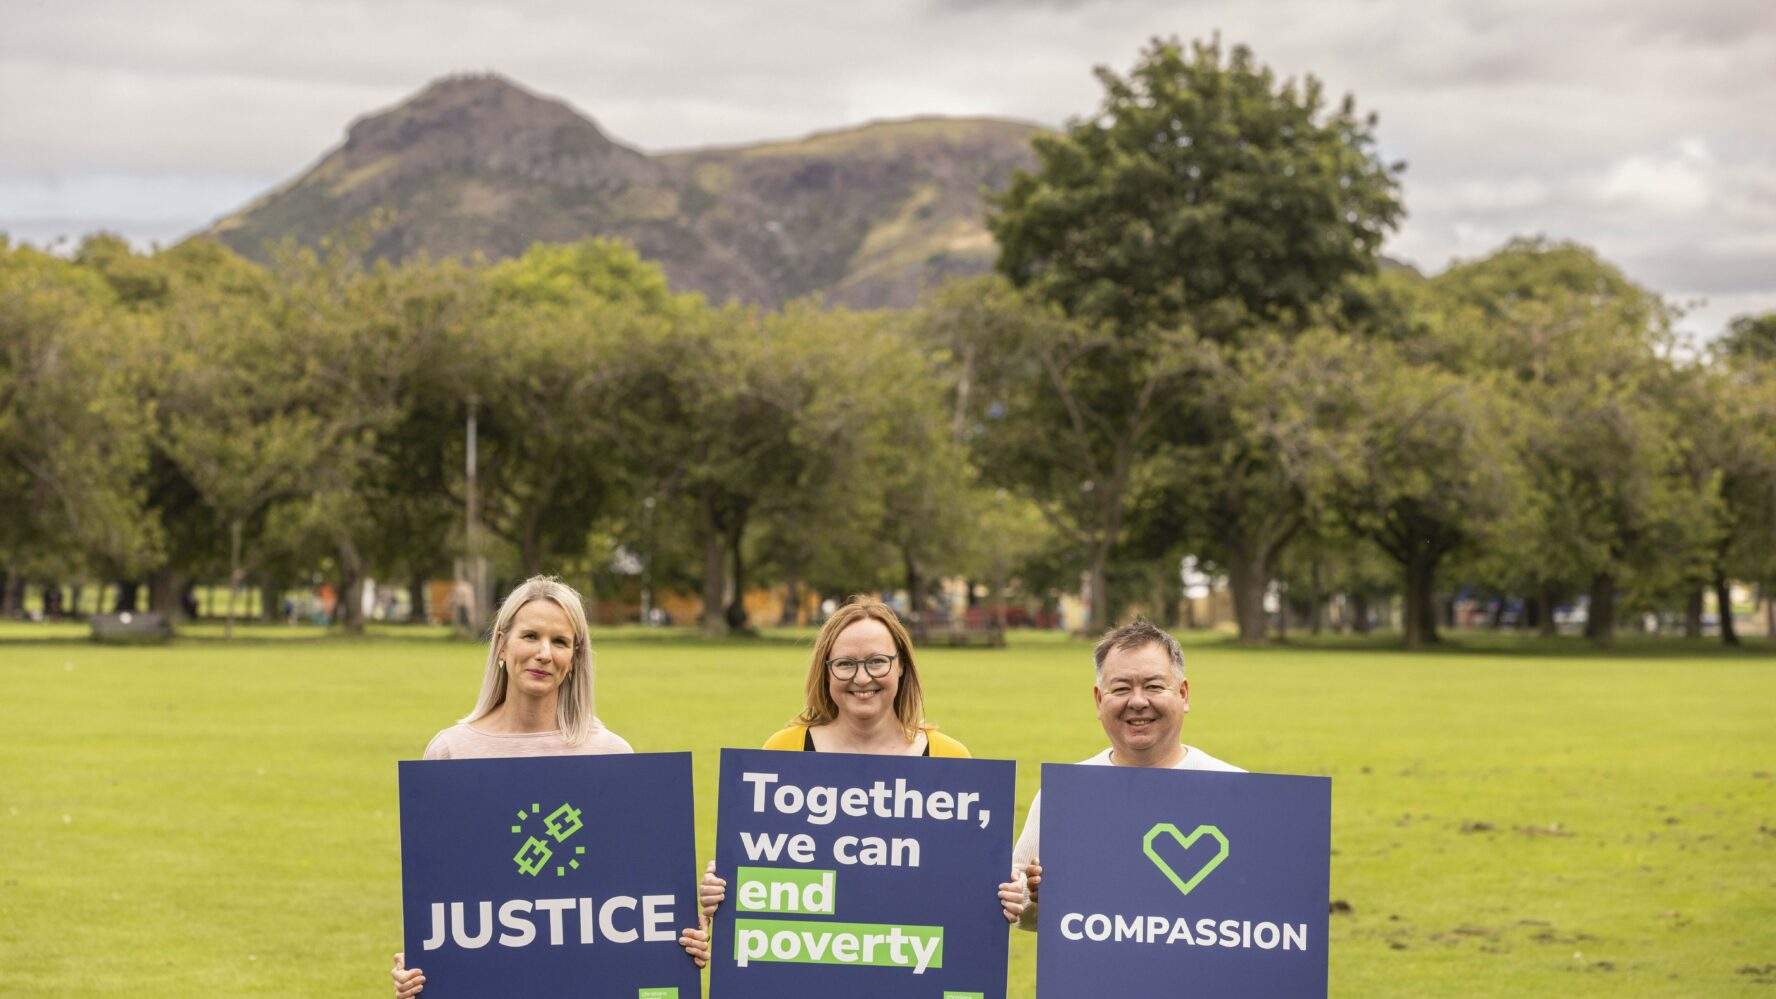 Three people stand in a field holding navy blue boards featuring the slogans 'justice', 'together we can fight poverty' and 'compassion'